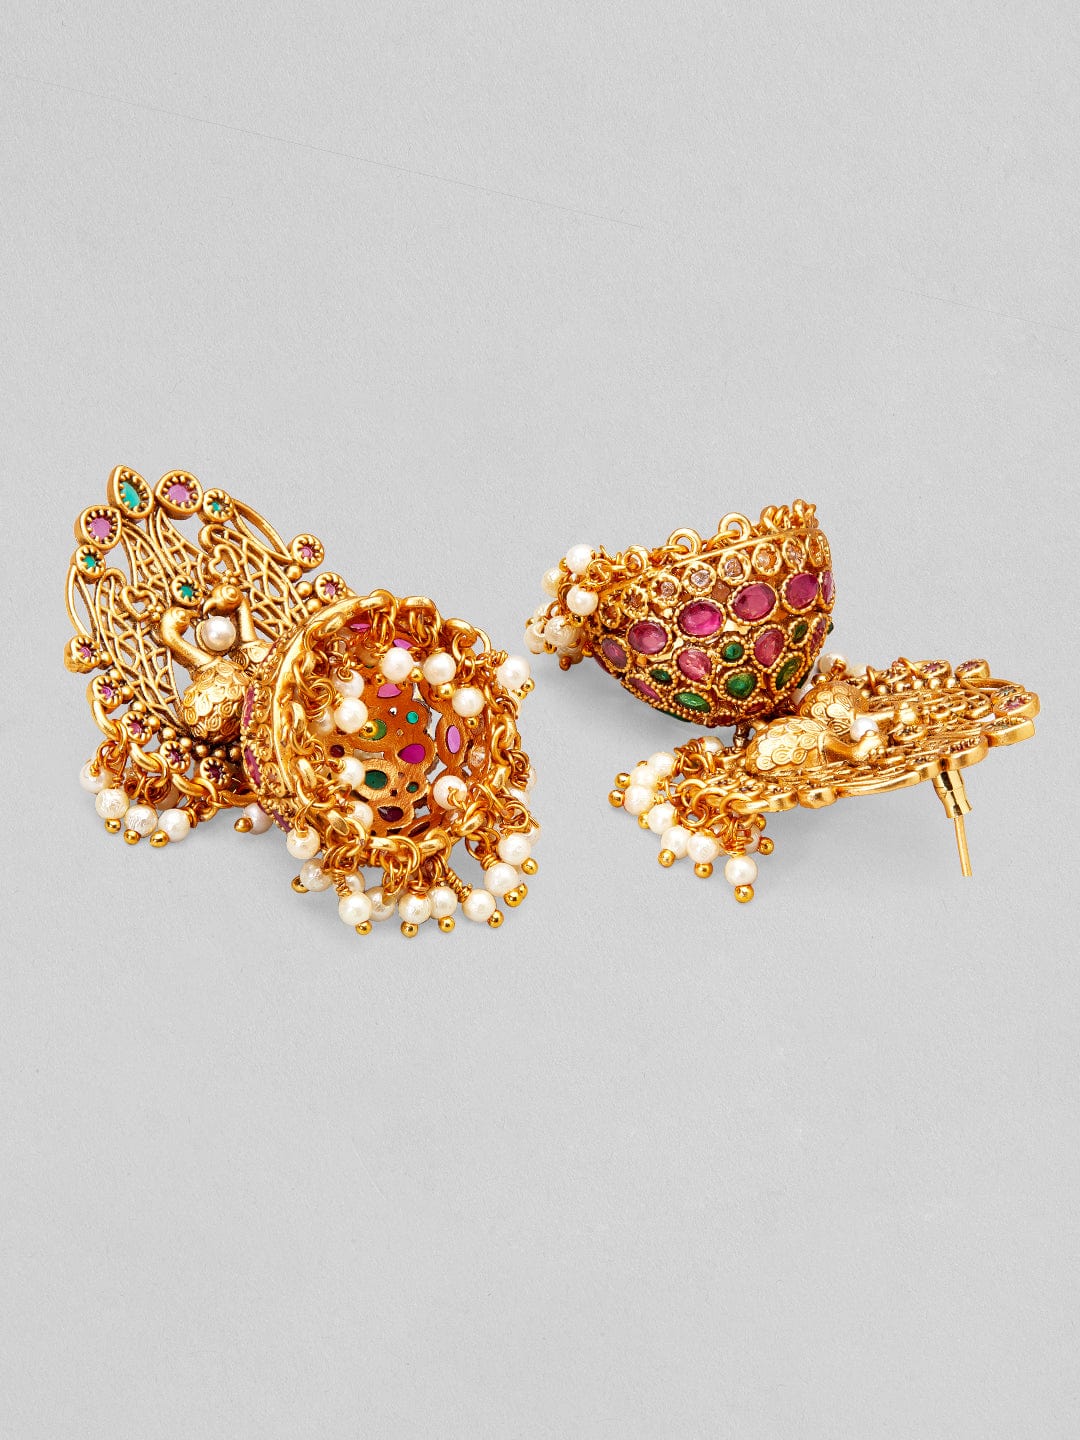 Rubans 22K Gold Plated Earrings With Peacock Design, Stone And Pearls. Earrings